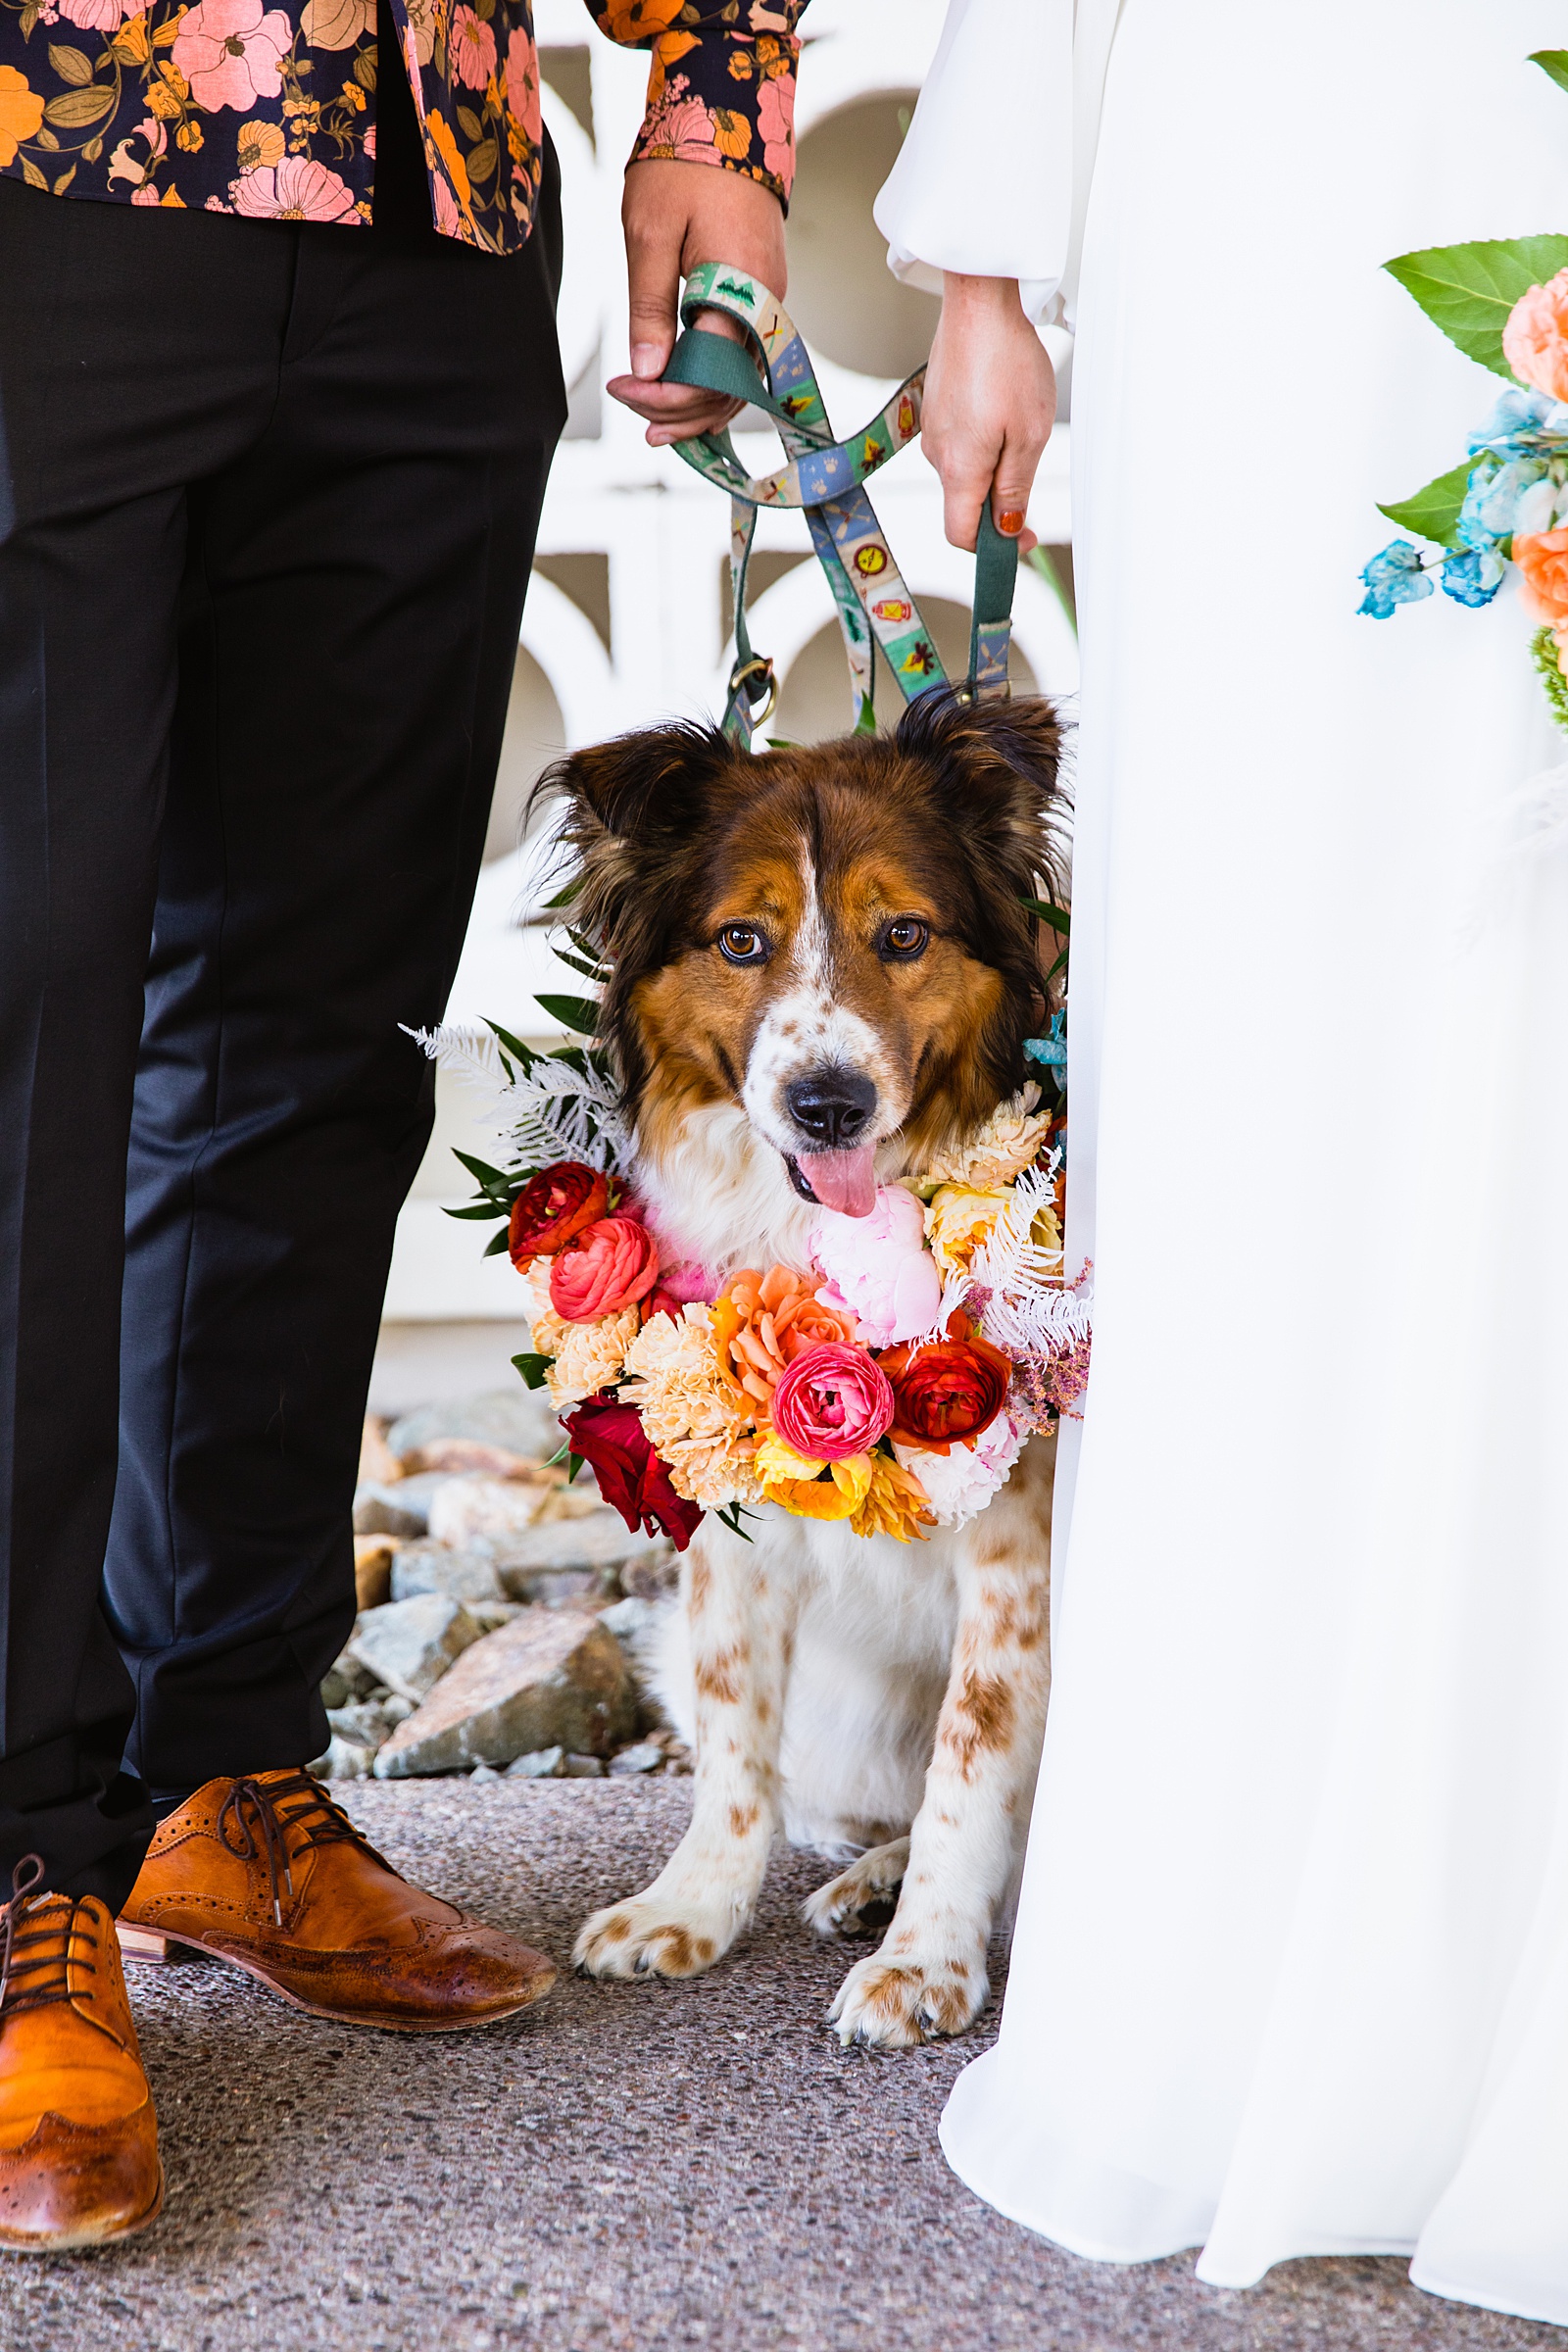 Bride and groom's first look with their dog at Mountain Shadows Resort by Phoenix wedding photographer PMA Photography.